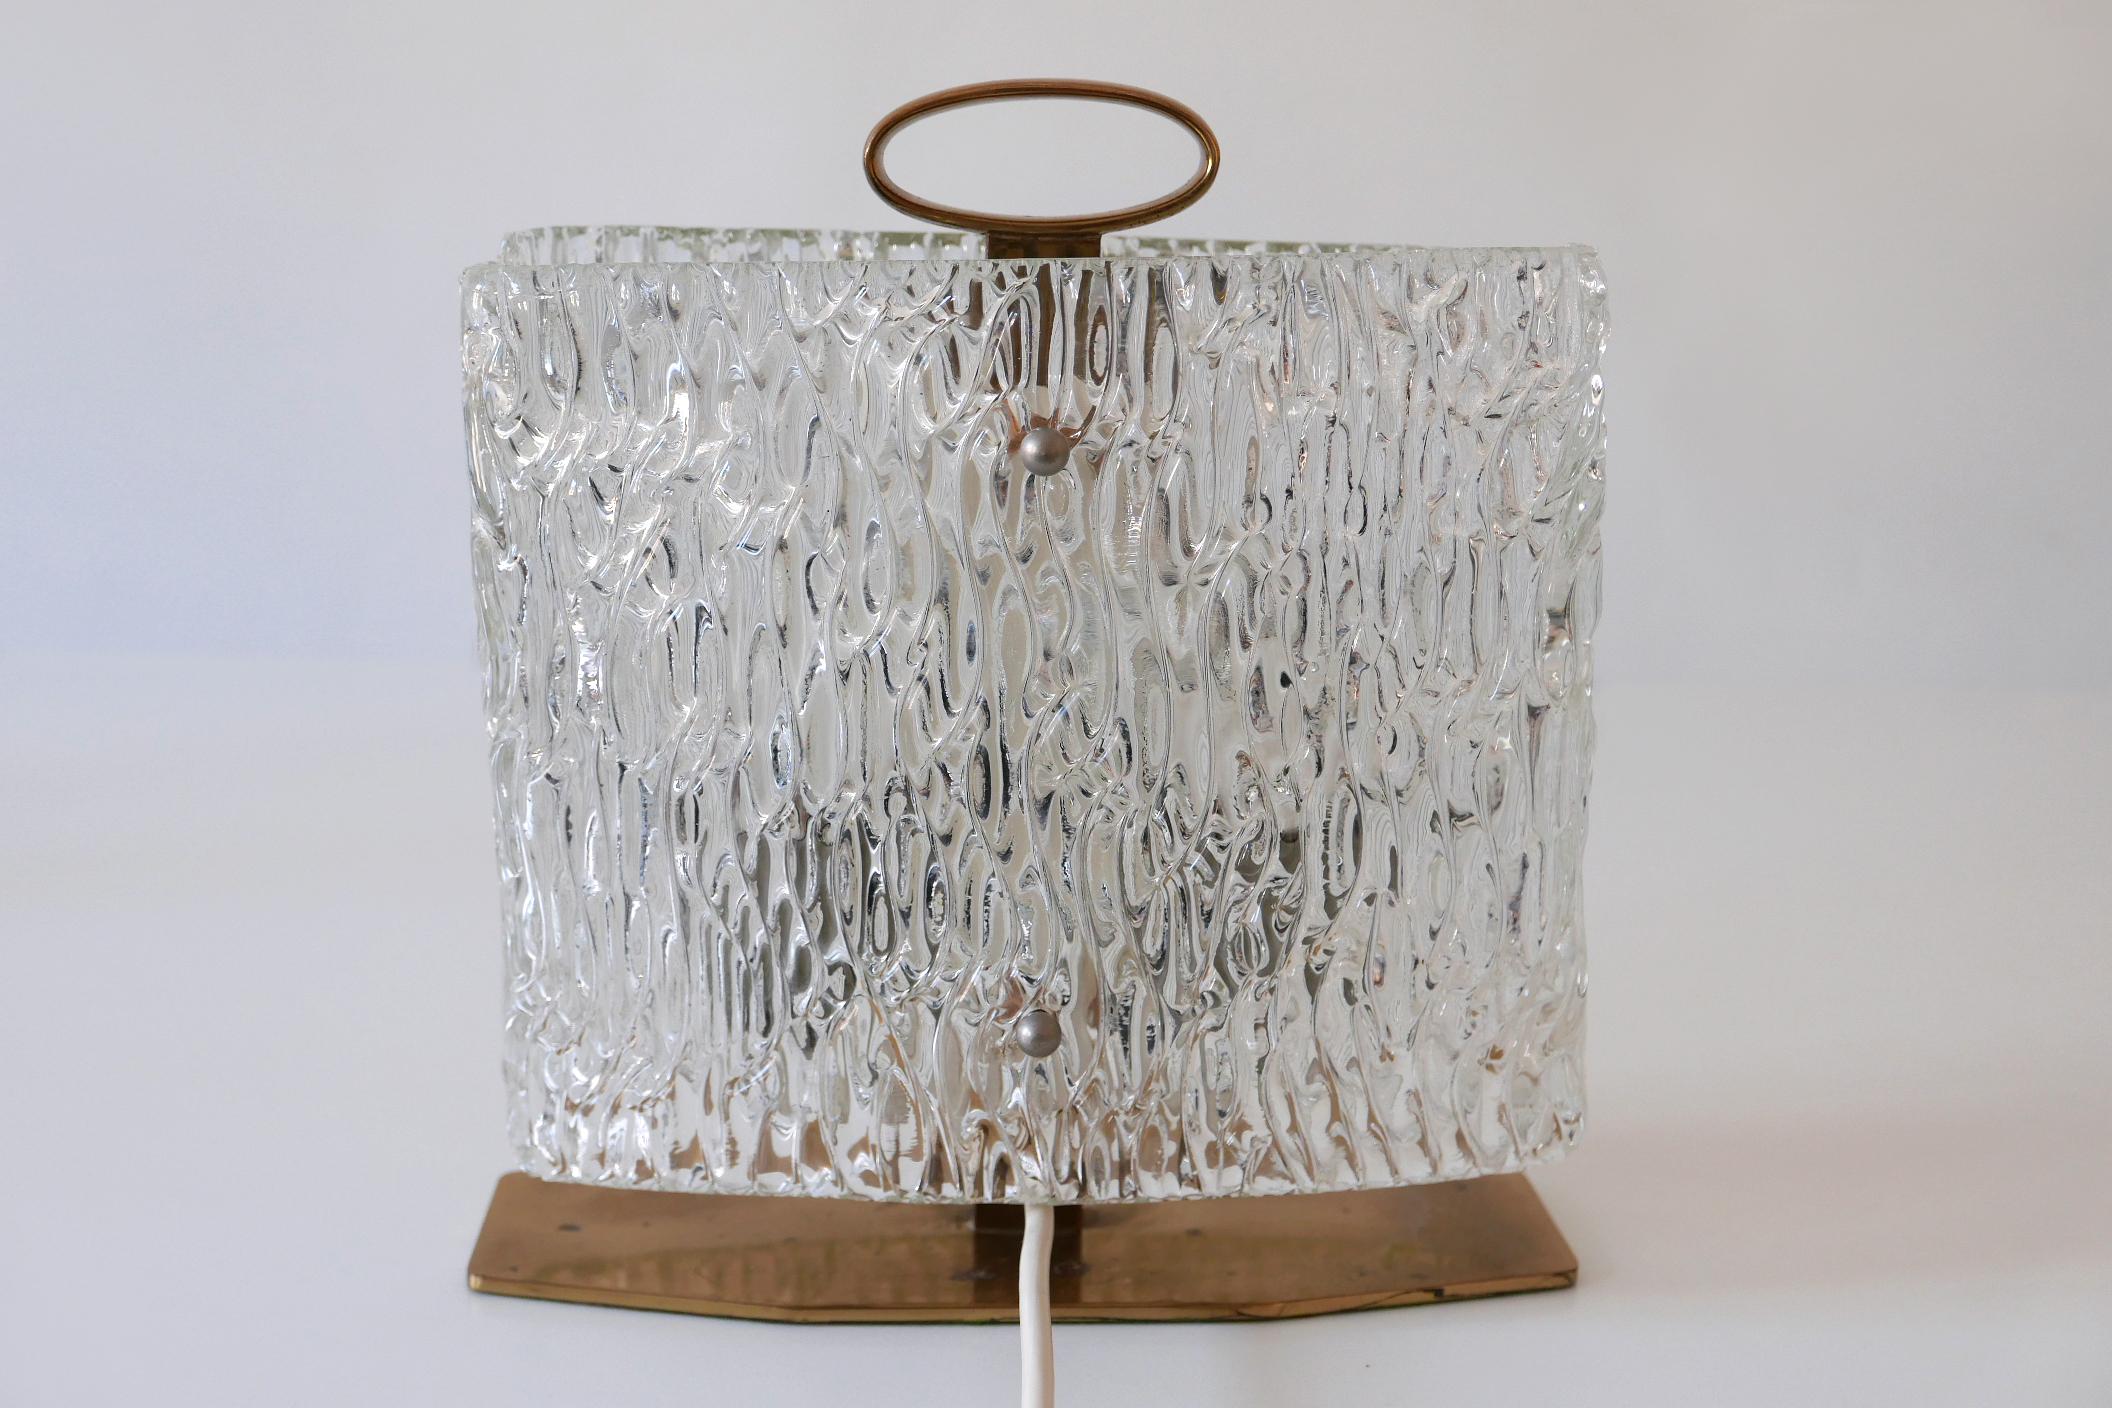 Exceptional Mid-Century Modern Table Lamp with Ice Glass Shade, 1950s, Italy For Sale 11